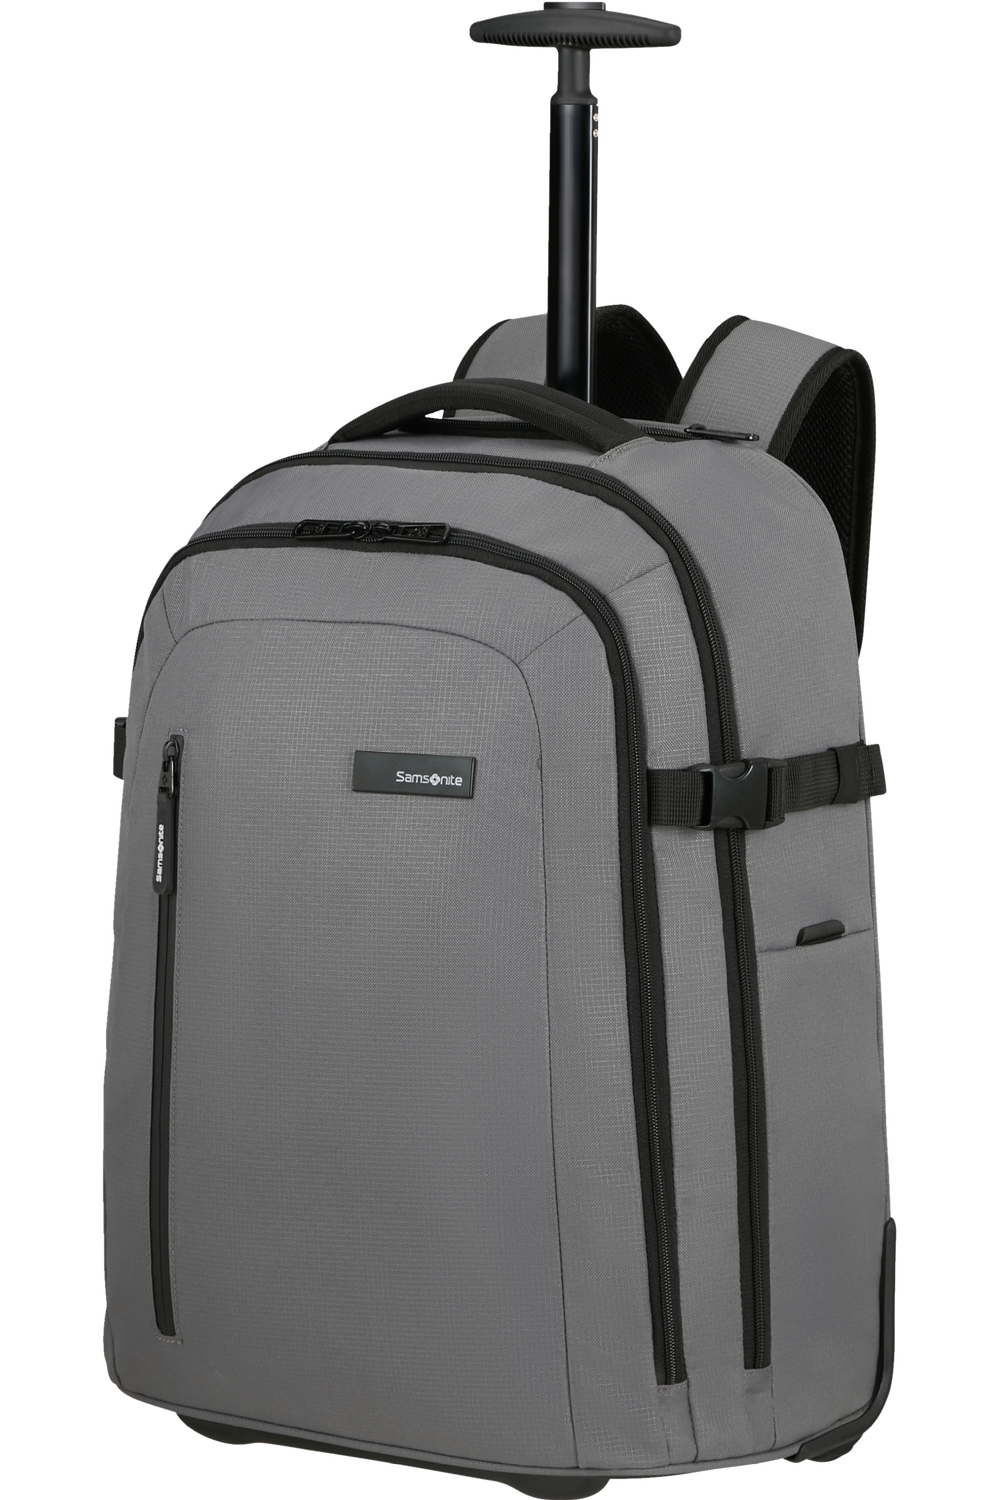 ROADER Laptop Bag with wheels 55cm - Drifter Grey – London Luggage